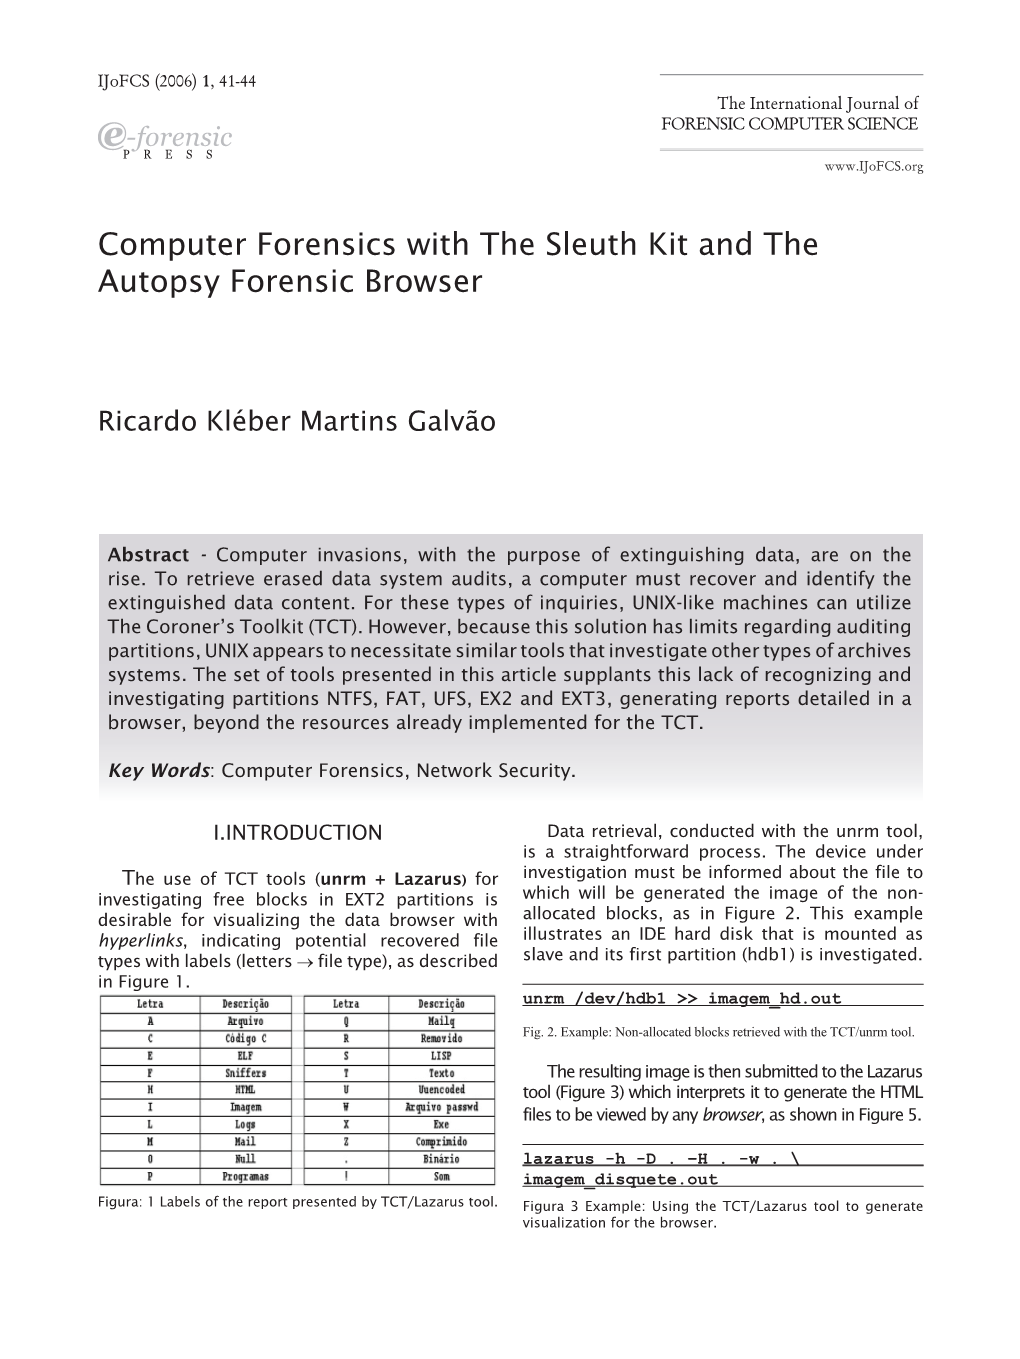 Computer Forensics with the Sleuth Kit and the Autopsy Forensic Browser